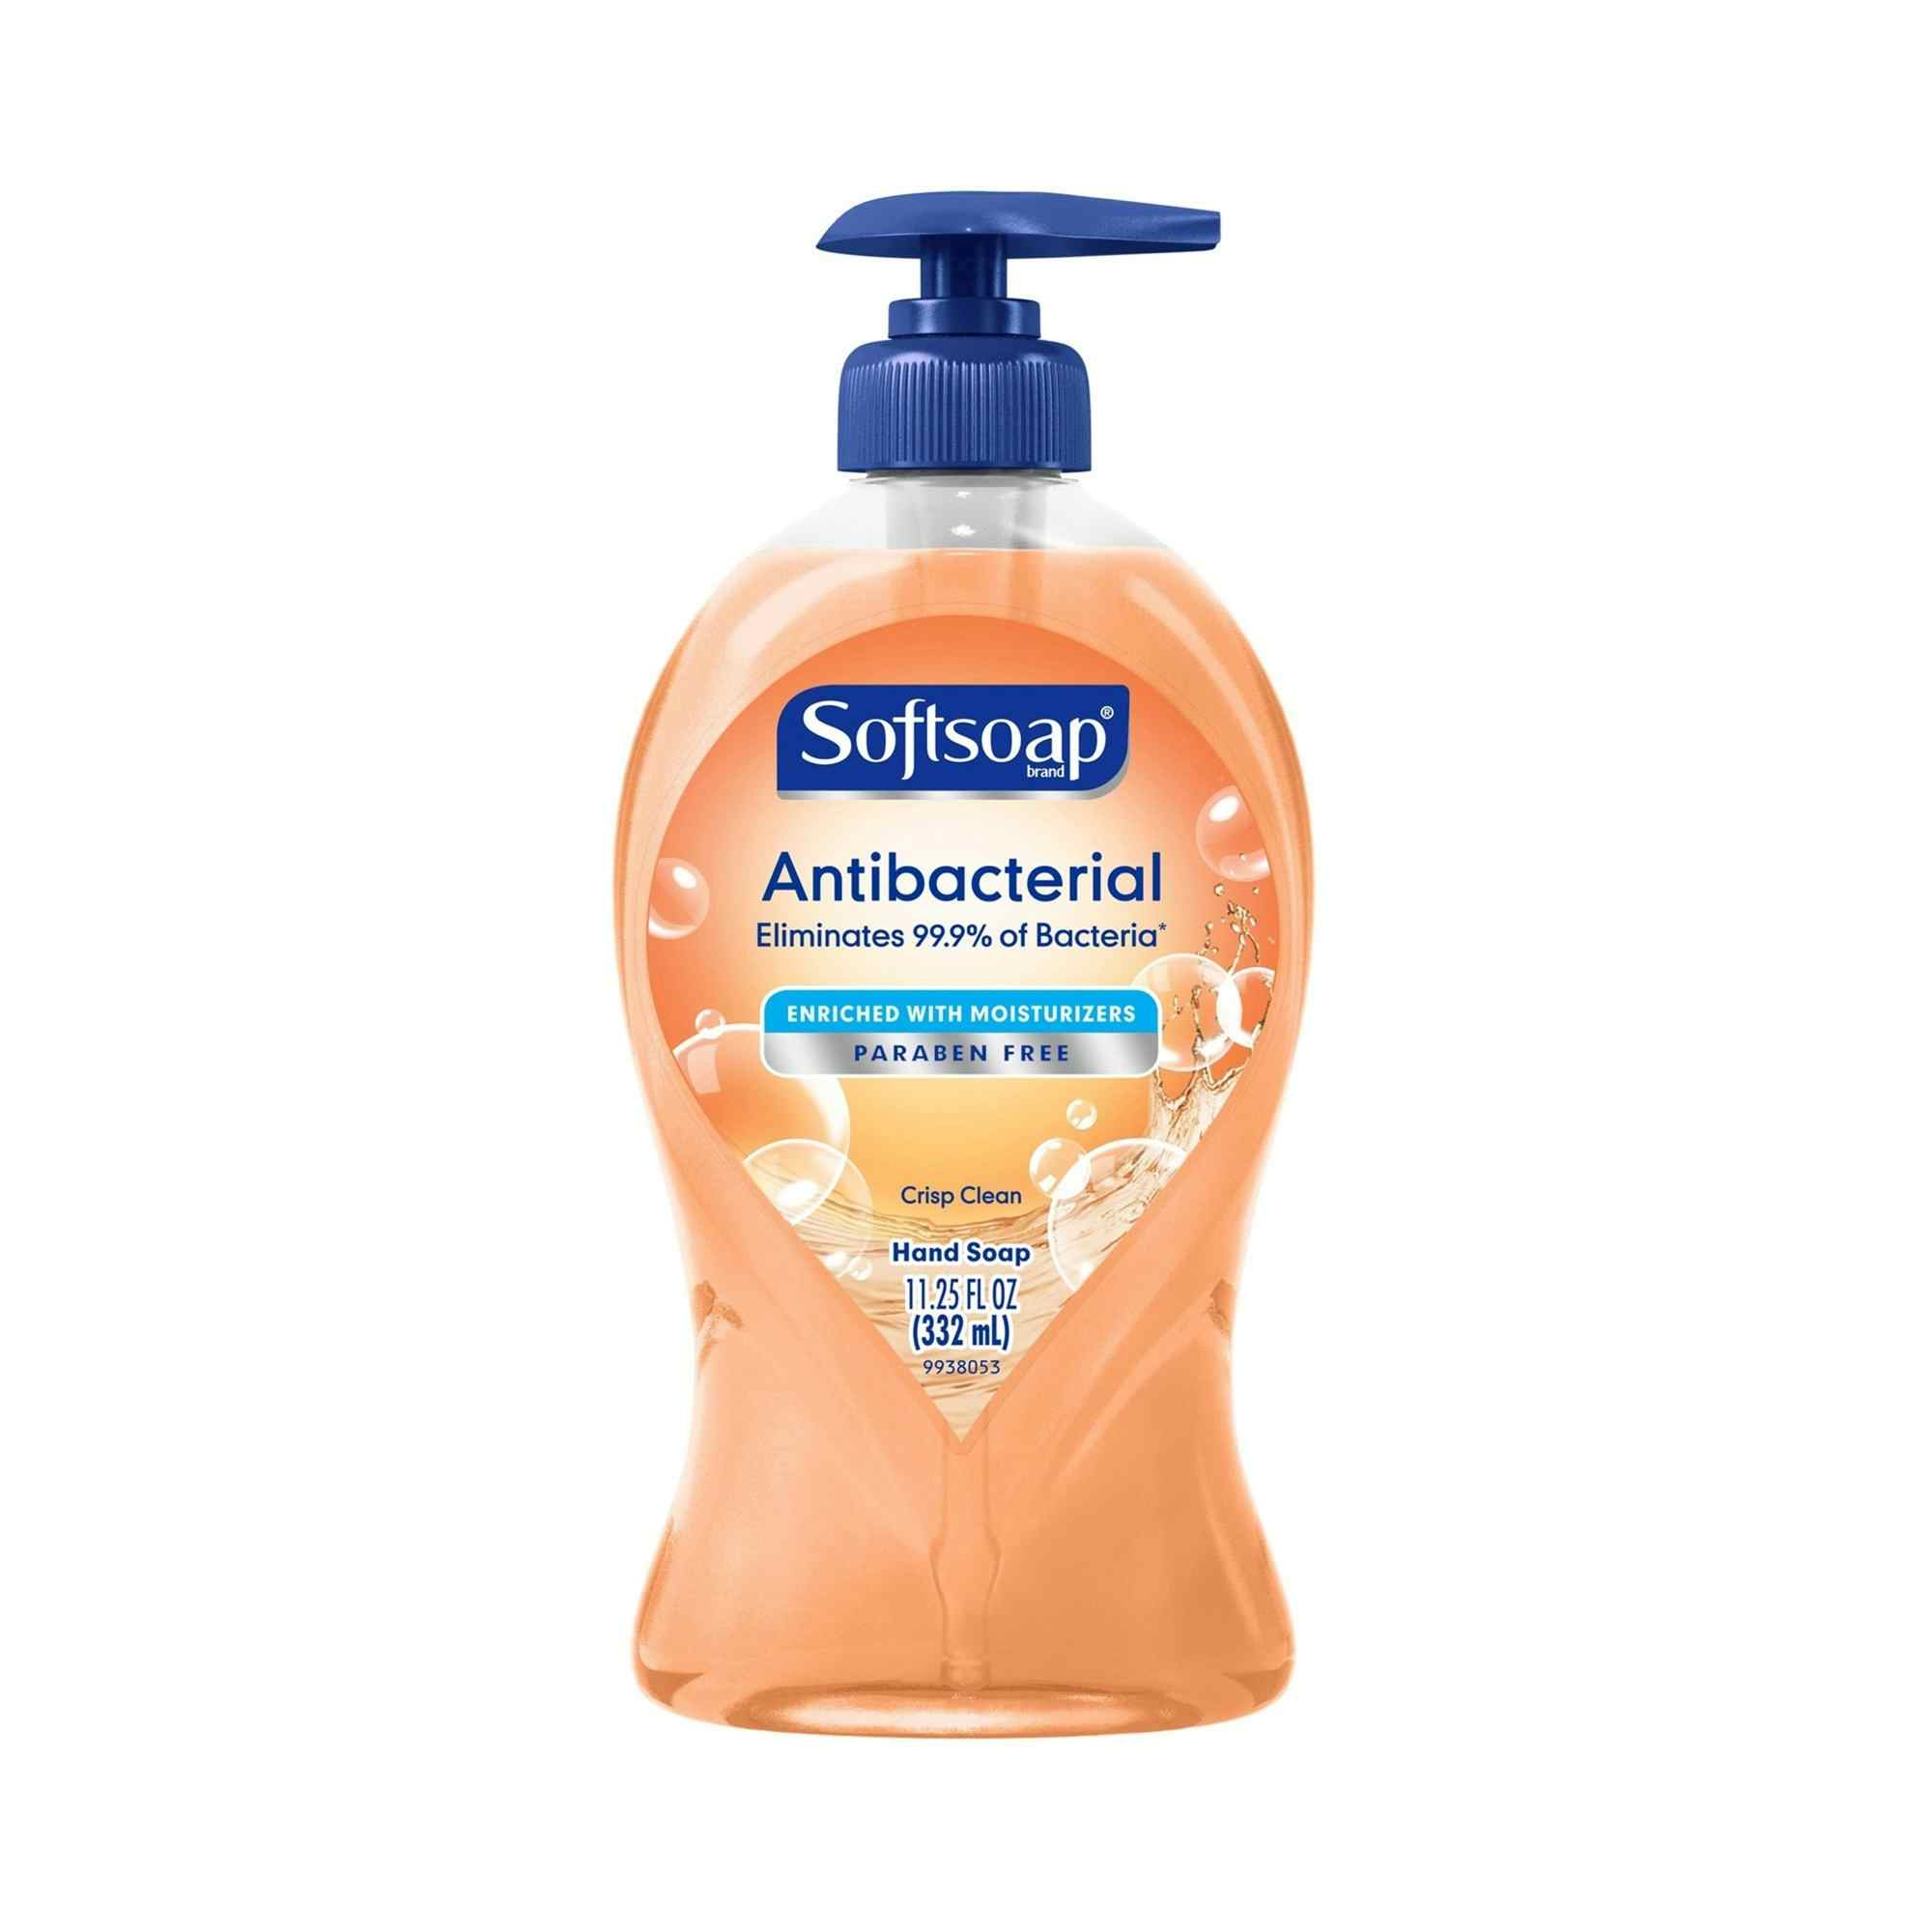 Softsoap Antibacterial Soap, US03562A, Case of 6